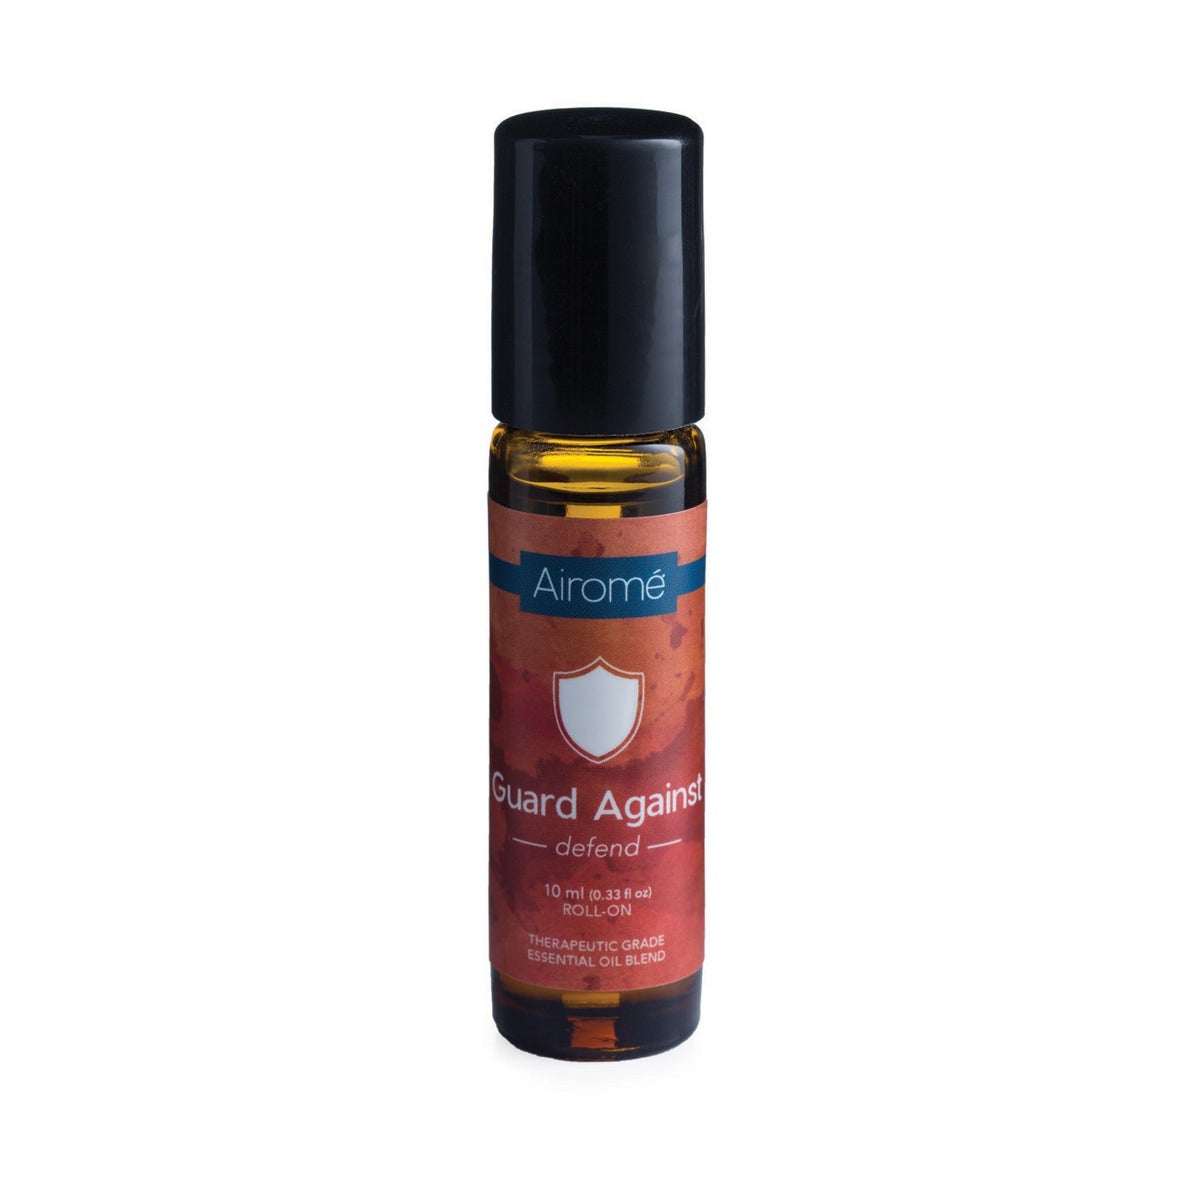 Roll-On Essential Oil Blend 10 ml - Guard Against